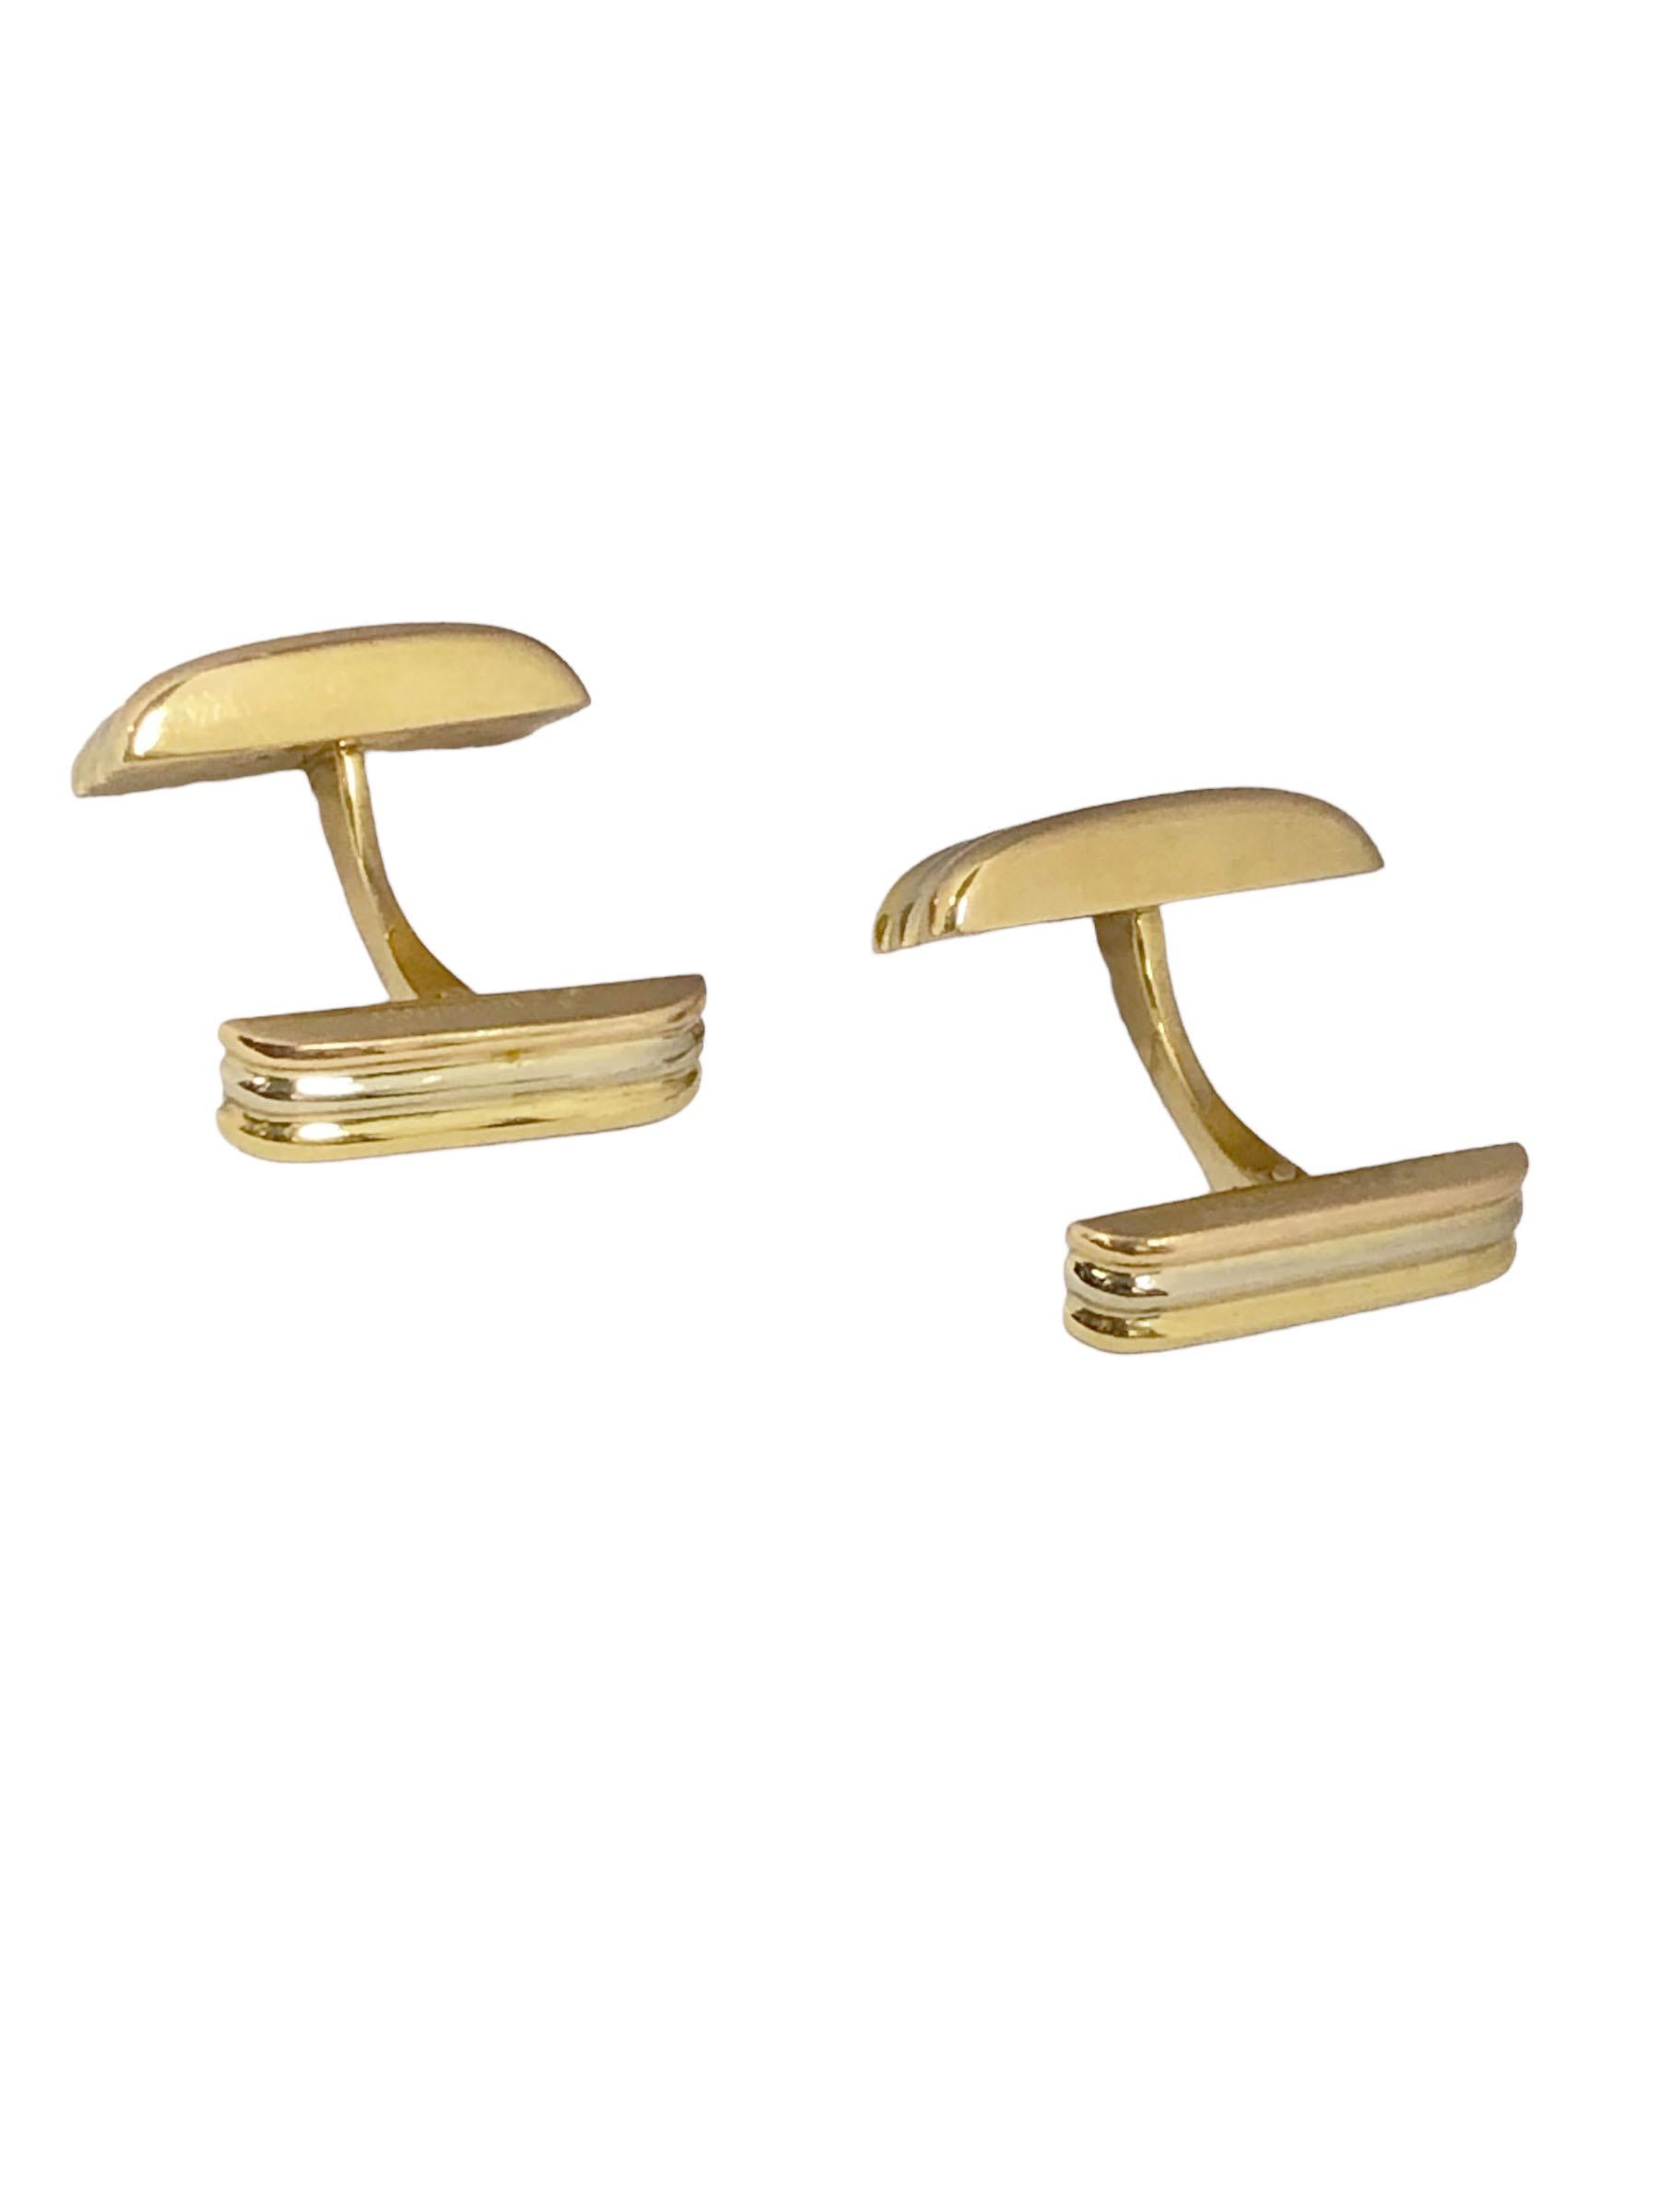 Circa 1990 Cartier Trinity collection 18k Yellow Gold Cufflinks, the tops measure 5/8 x 5/16 inch. having hinged toggle style backs for easy on and off. Signed and n numbered, come in original Cartier Travel pouch.